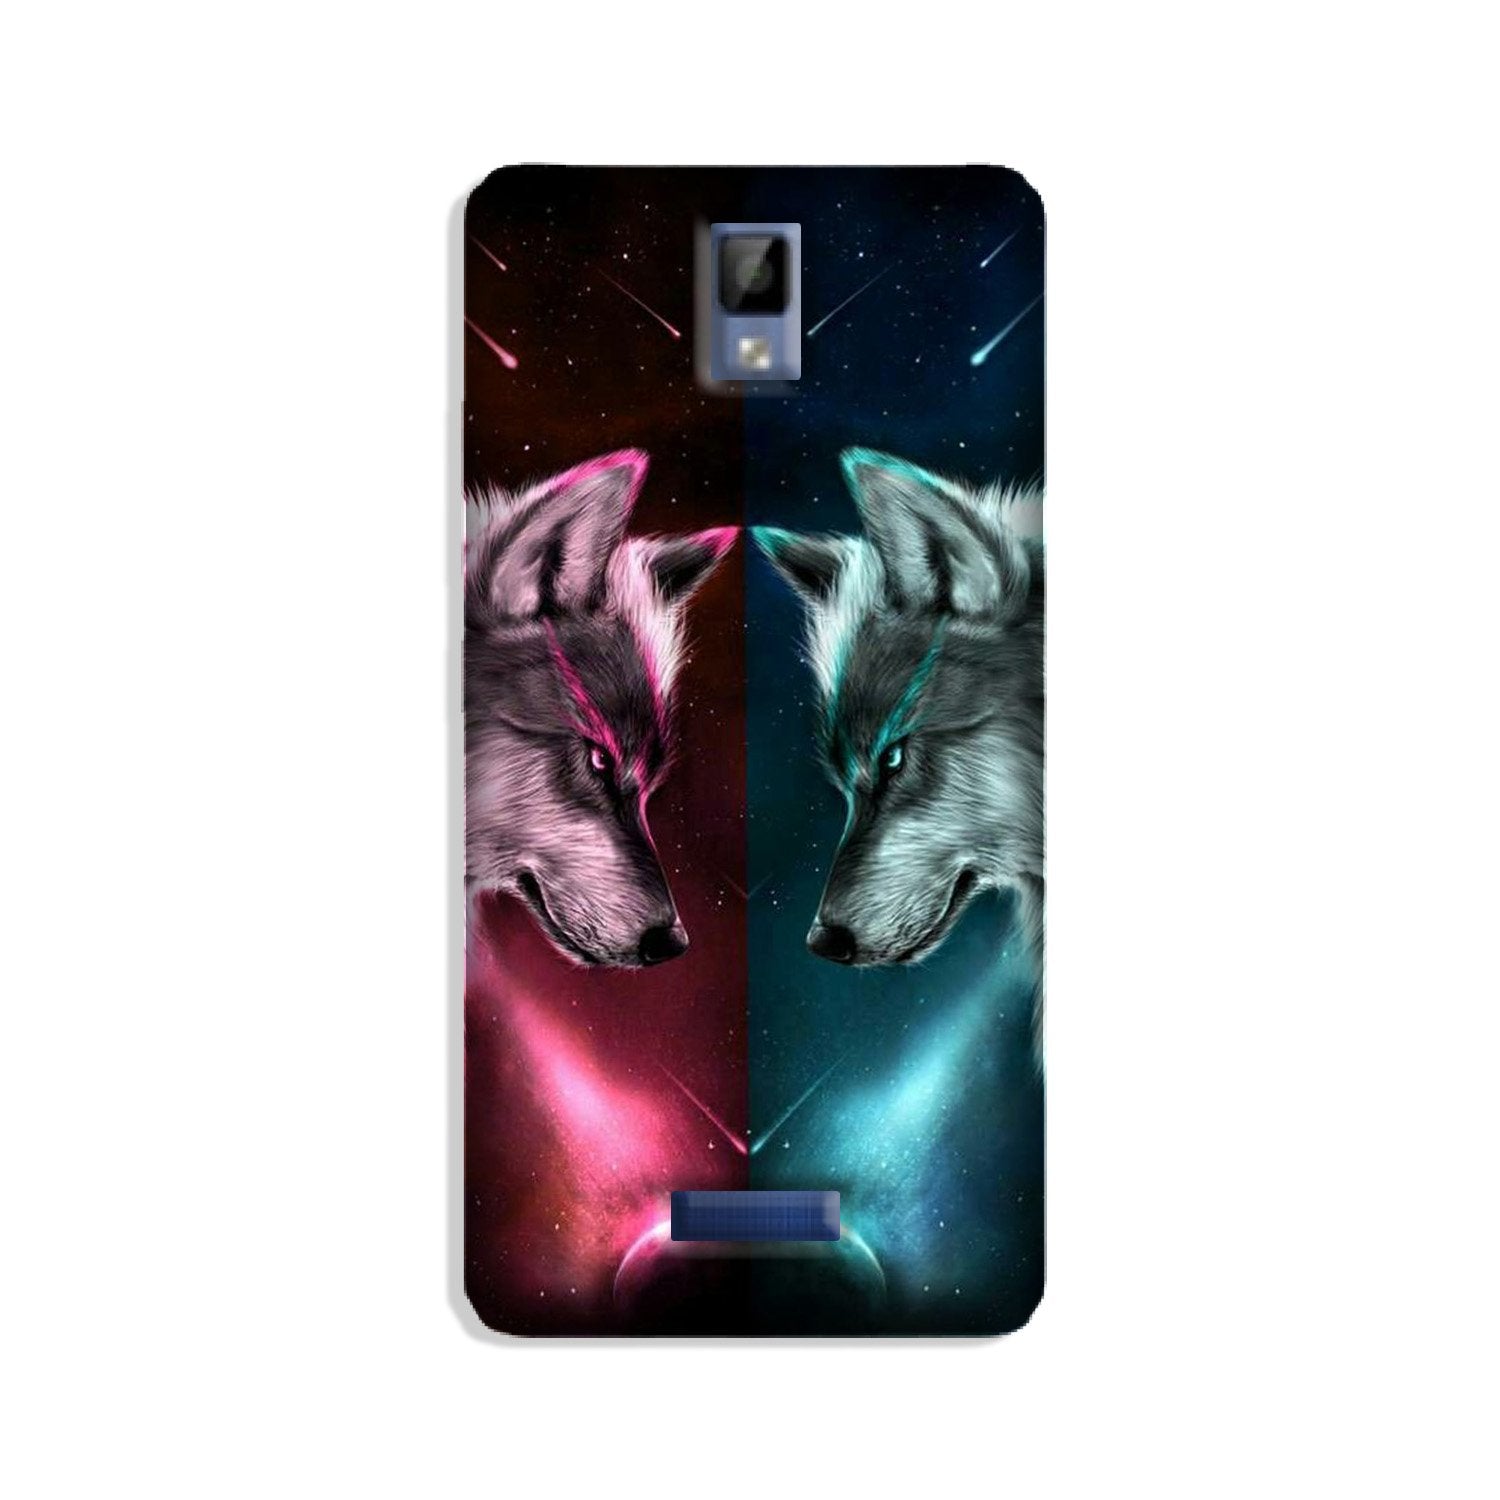 Wolf fight Case for Gionee P7 (Design No. 221)